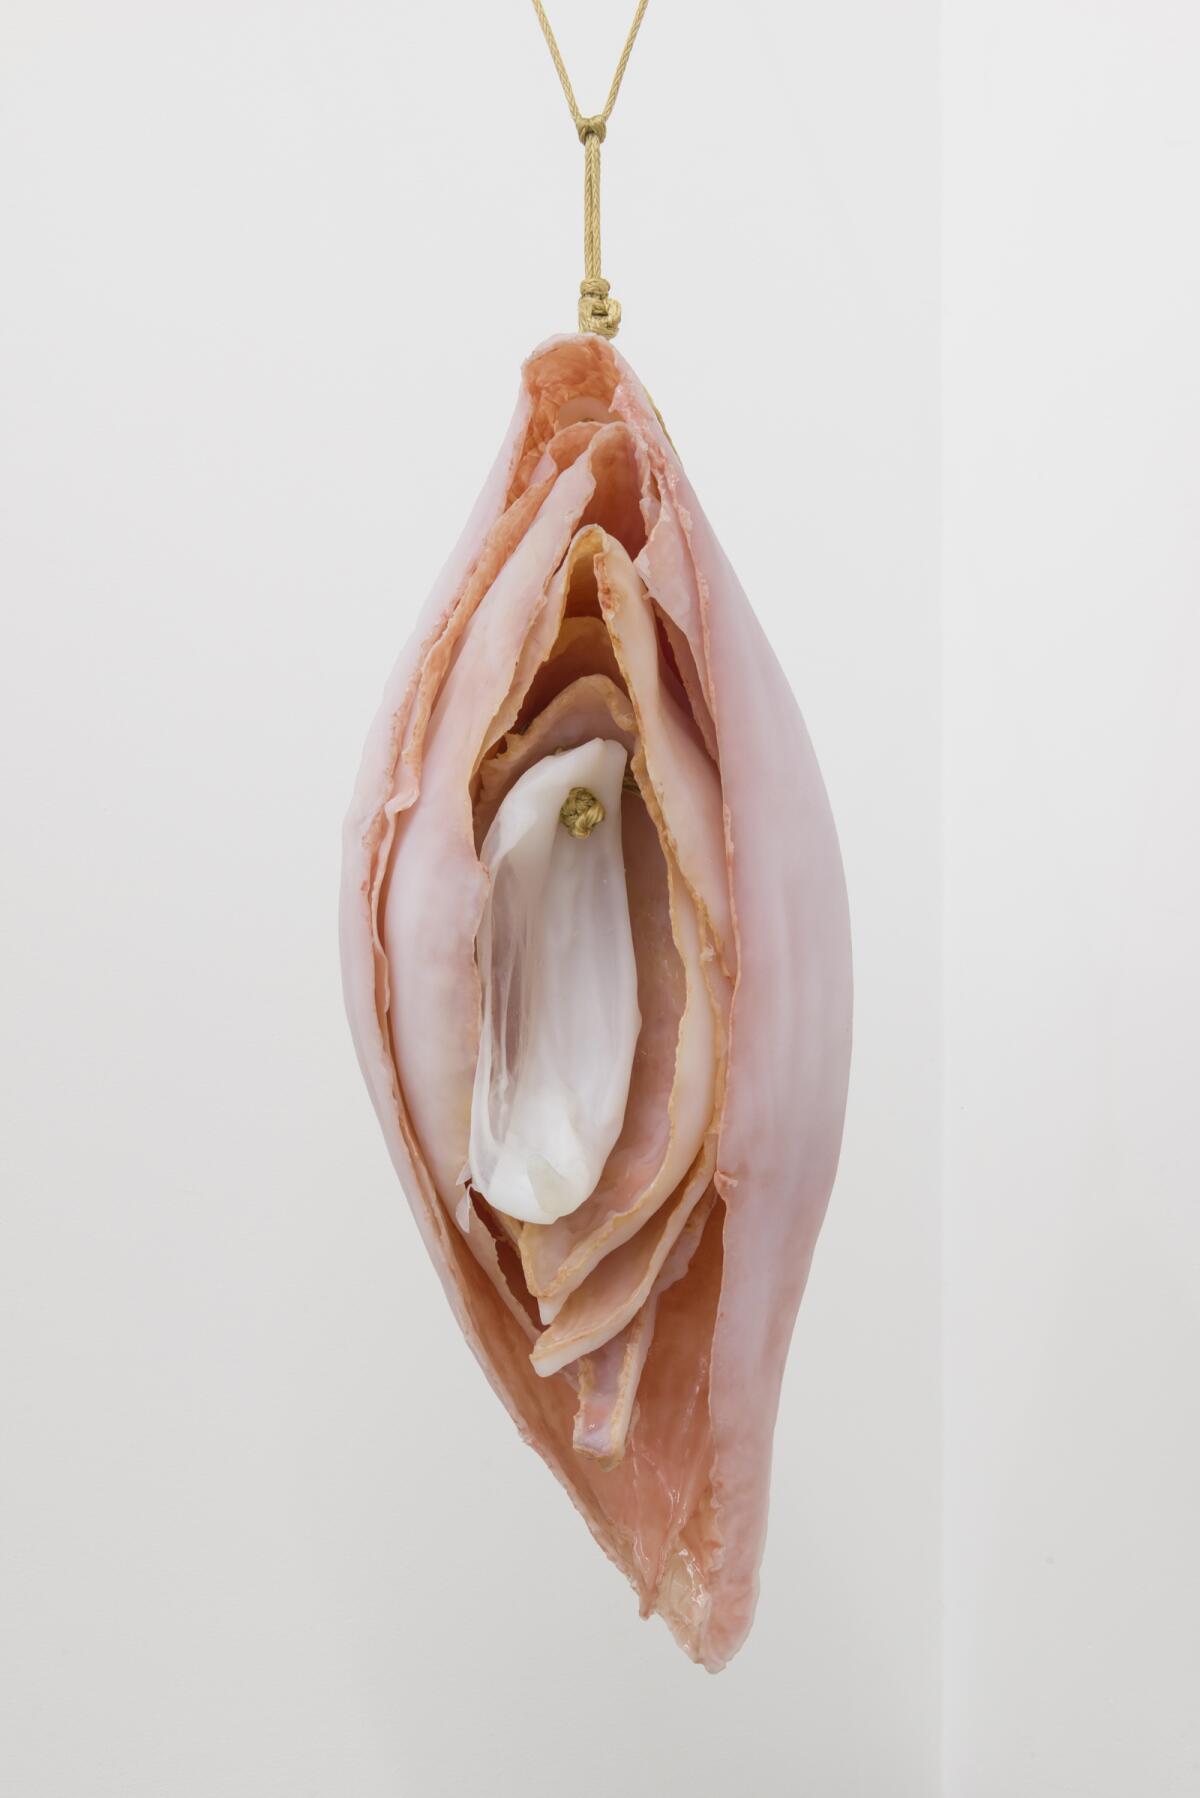 "Eat Me," a shell and flower petal-like sculpture by Kelly Akashi.